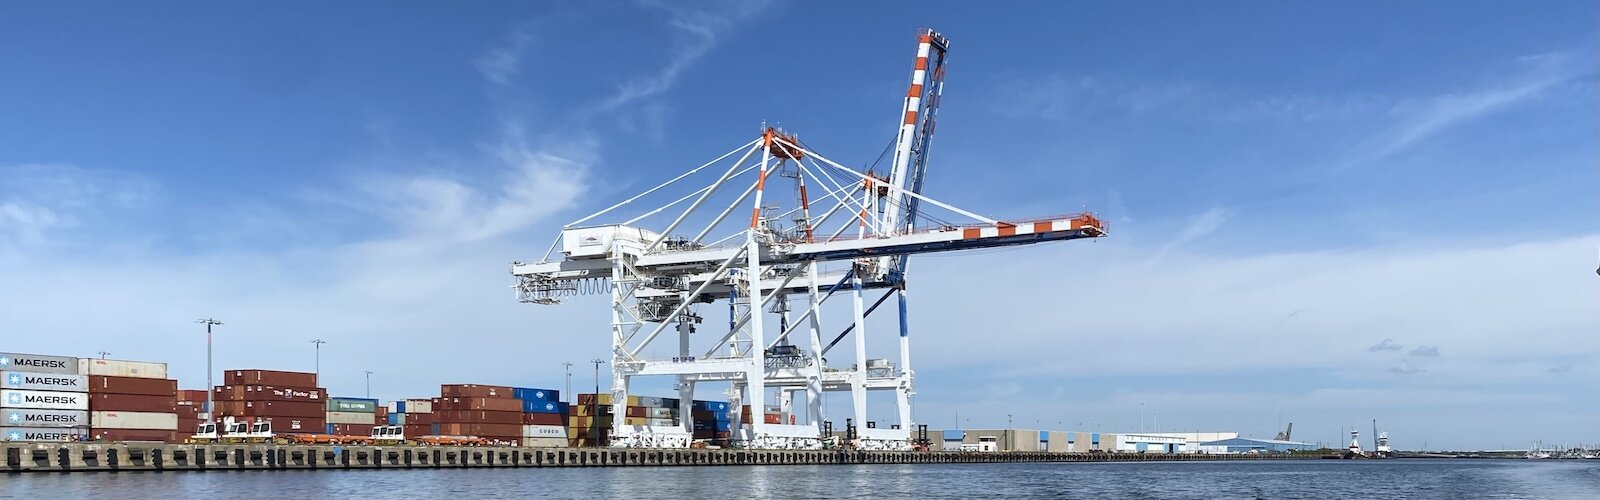 Gantry cranes await the next load of containers at Port Tampa Bay, which touts nearly 500,000 square feet of warehouse and transit shed capacity.